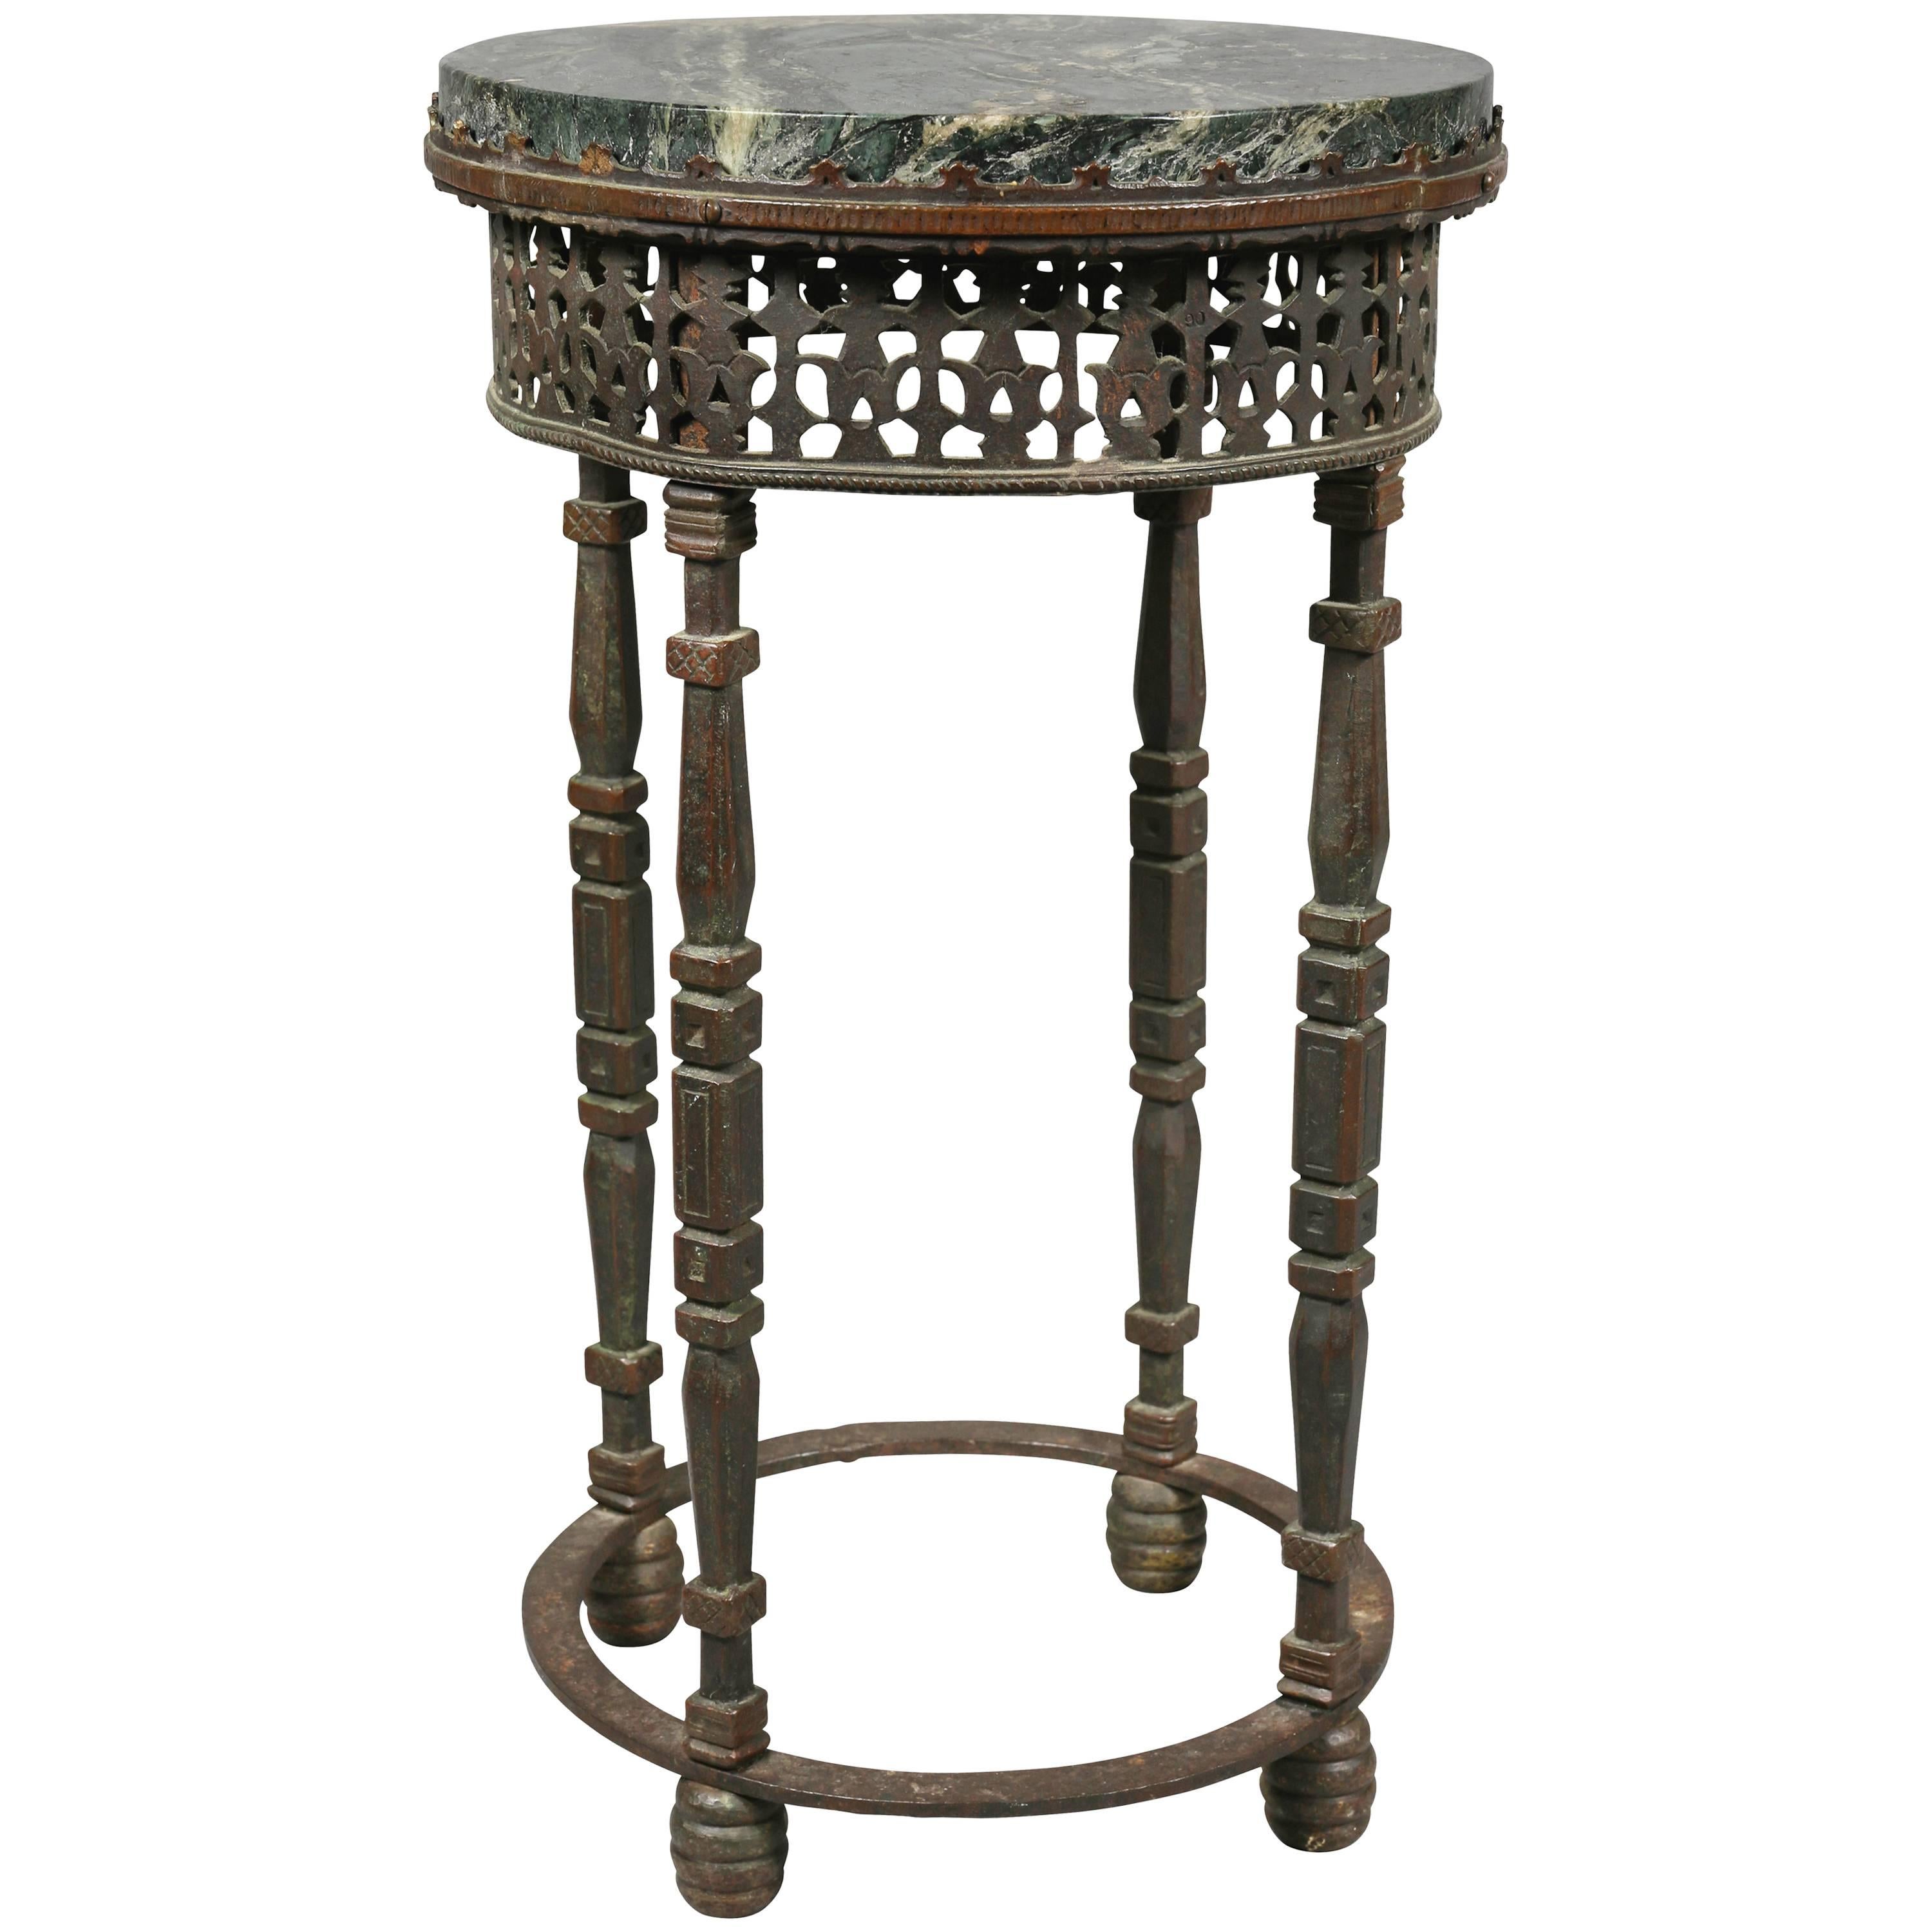 Oscar Bach Wrought Iron and Bronze Marble-Top Table